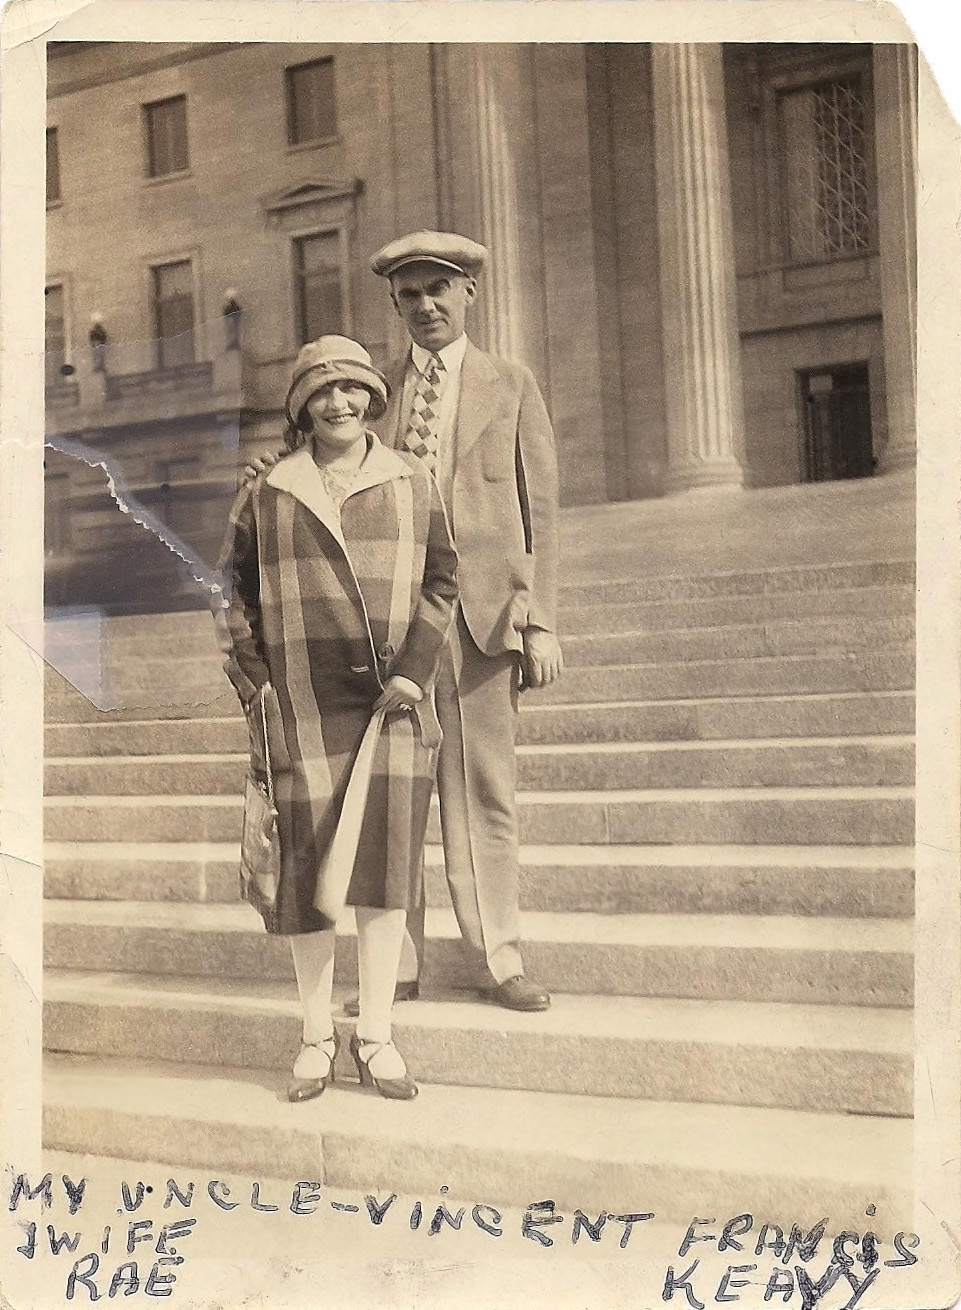 Mr Great Uncle Jack Keavy (part of Minneapolis Mob  in 1920s) and his wife Rae Keavy in Minneapolis sometime in the 20s. View full size.